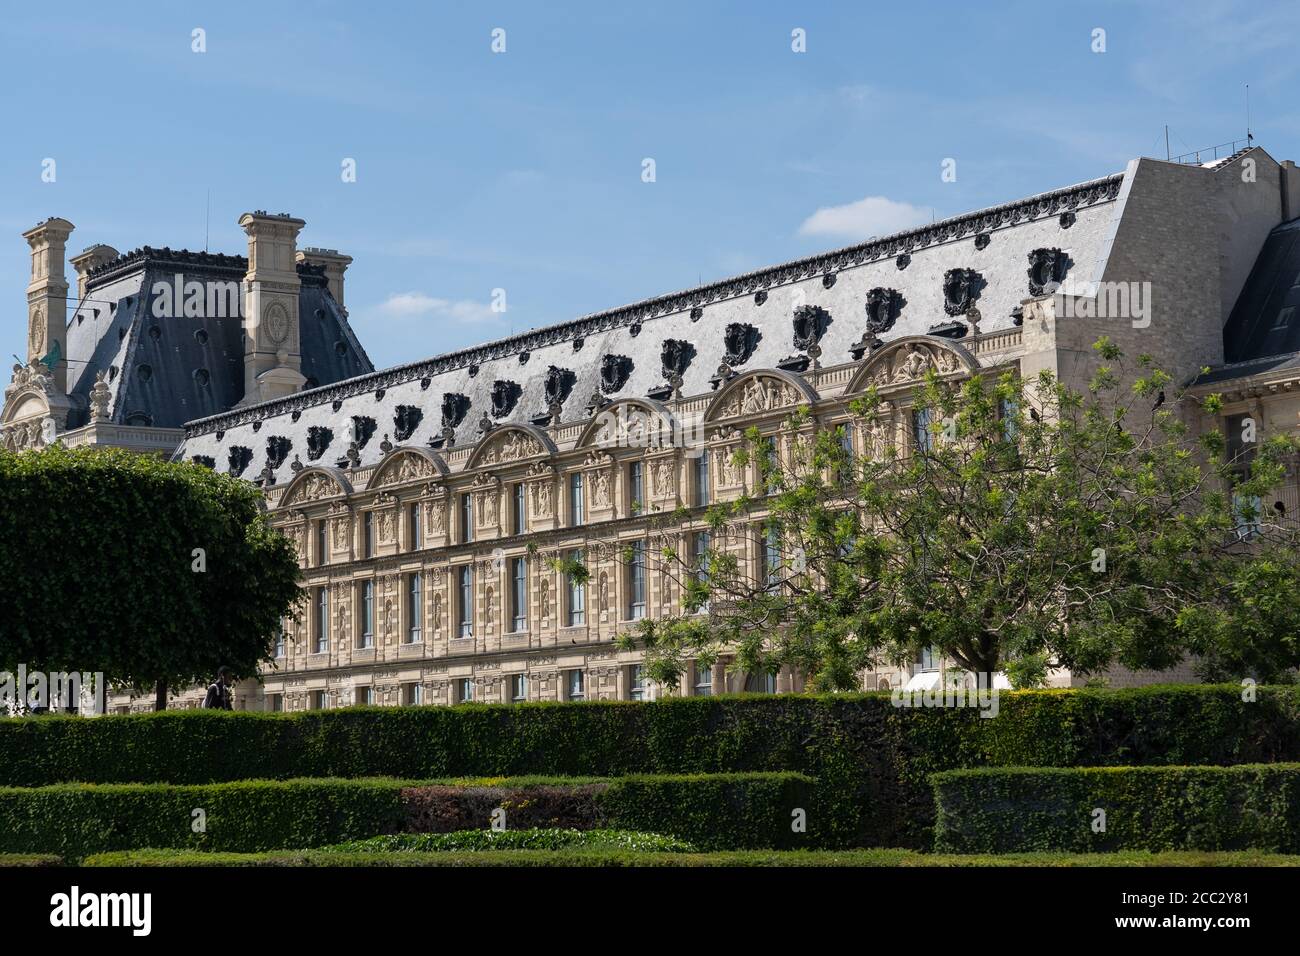 Close-up of Louvre palace museum with park, lawn and flowers at hot sunny day. Jardin des tuileries. Paris - France, 31. may 2019 Stock Photo